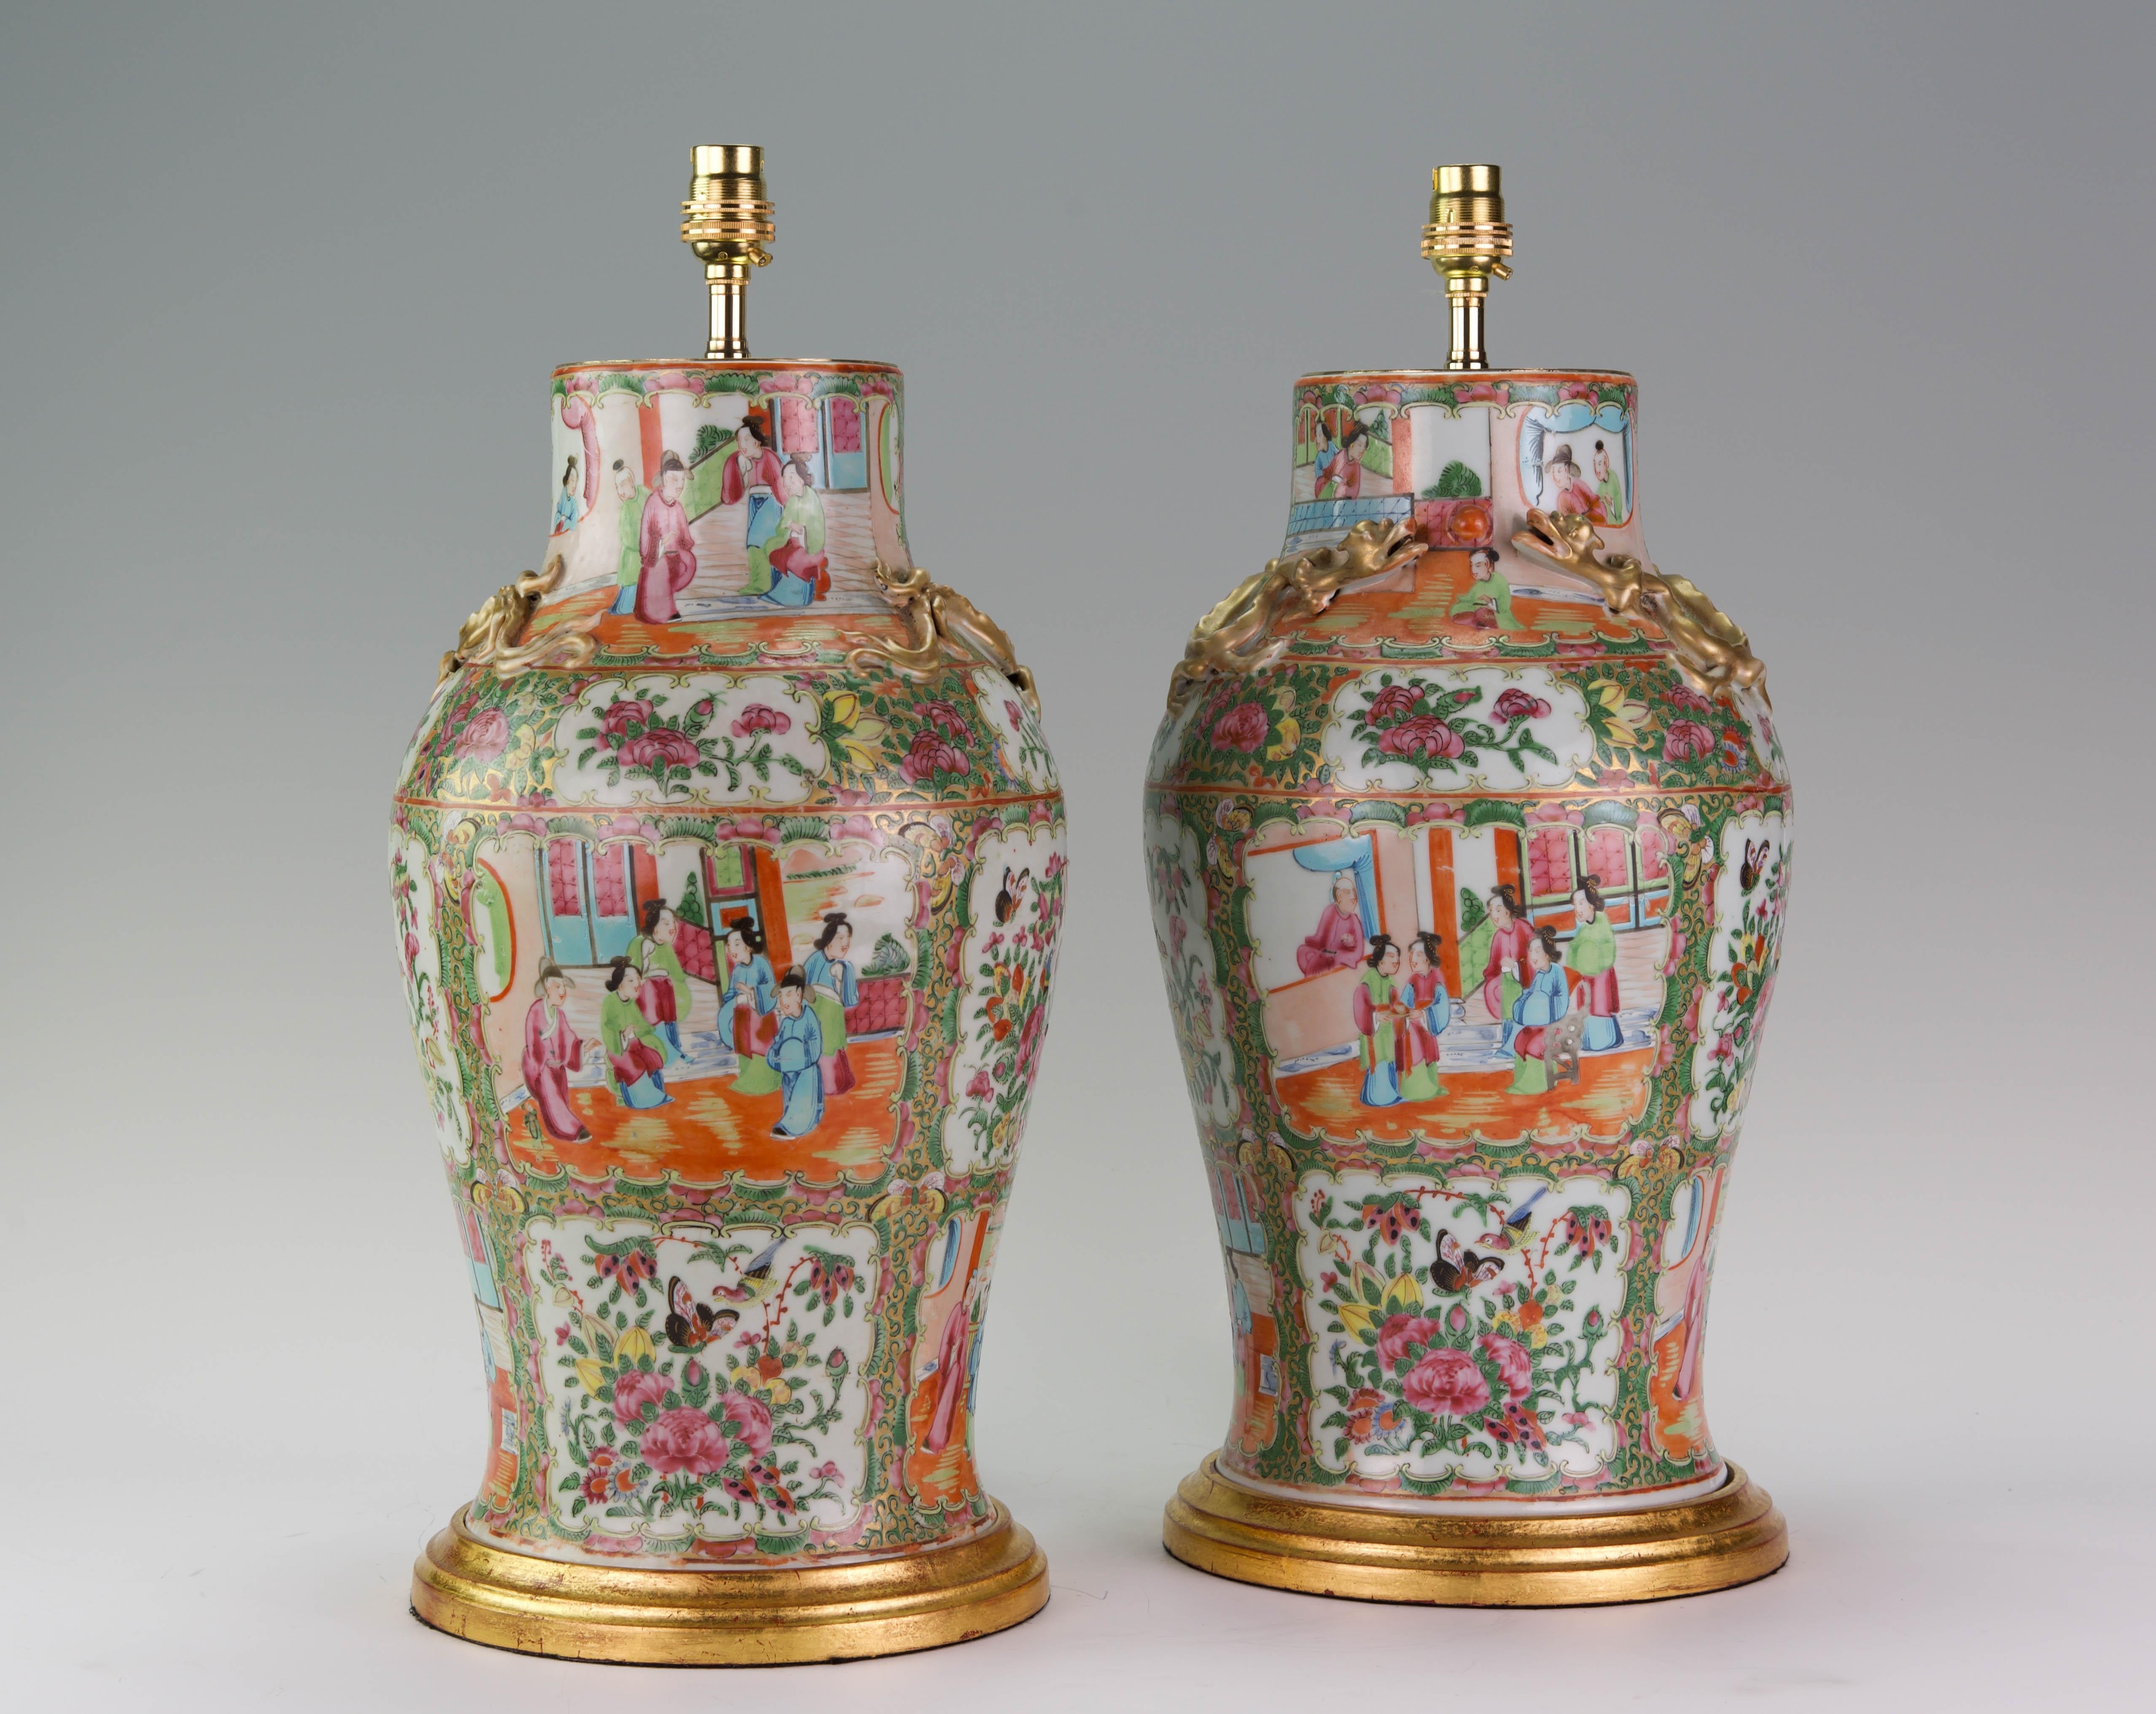 A fine pair of late 19th century Chinese Canton enamel porcelain baluster vases, decorated through in the typical rose medallion palette, with panels showing scenes of courtly life with figures in pavilions and garden landscapes, and with exotic